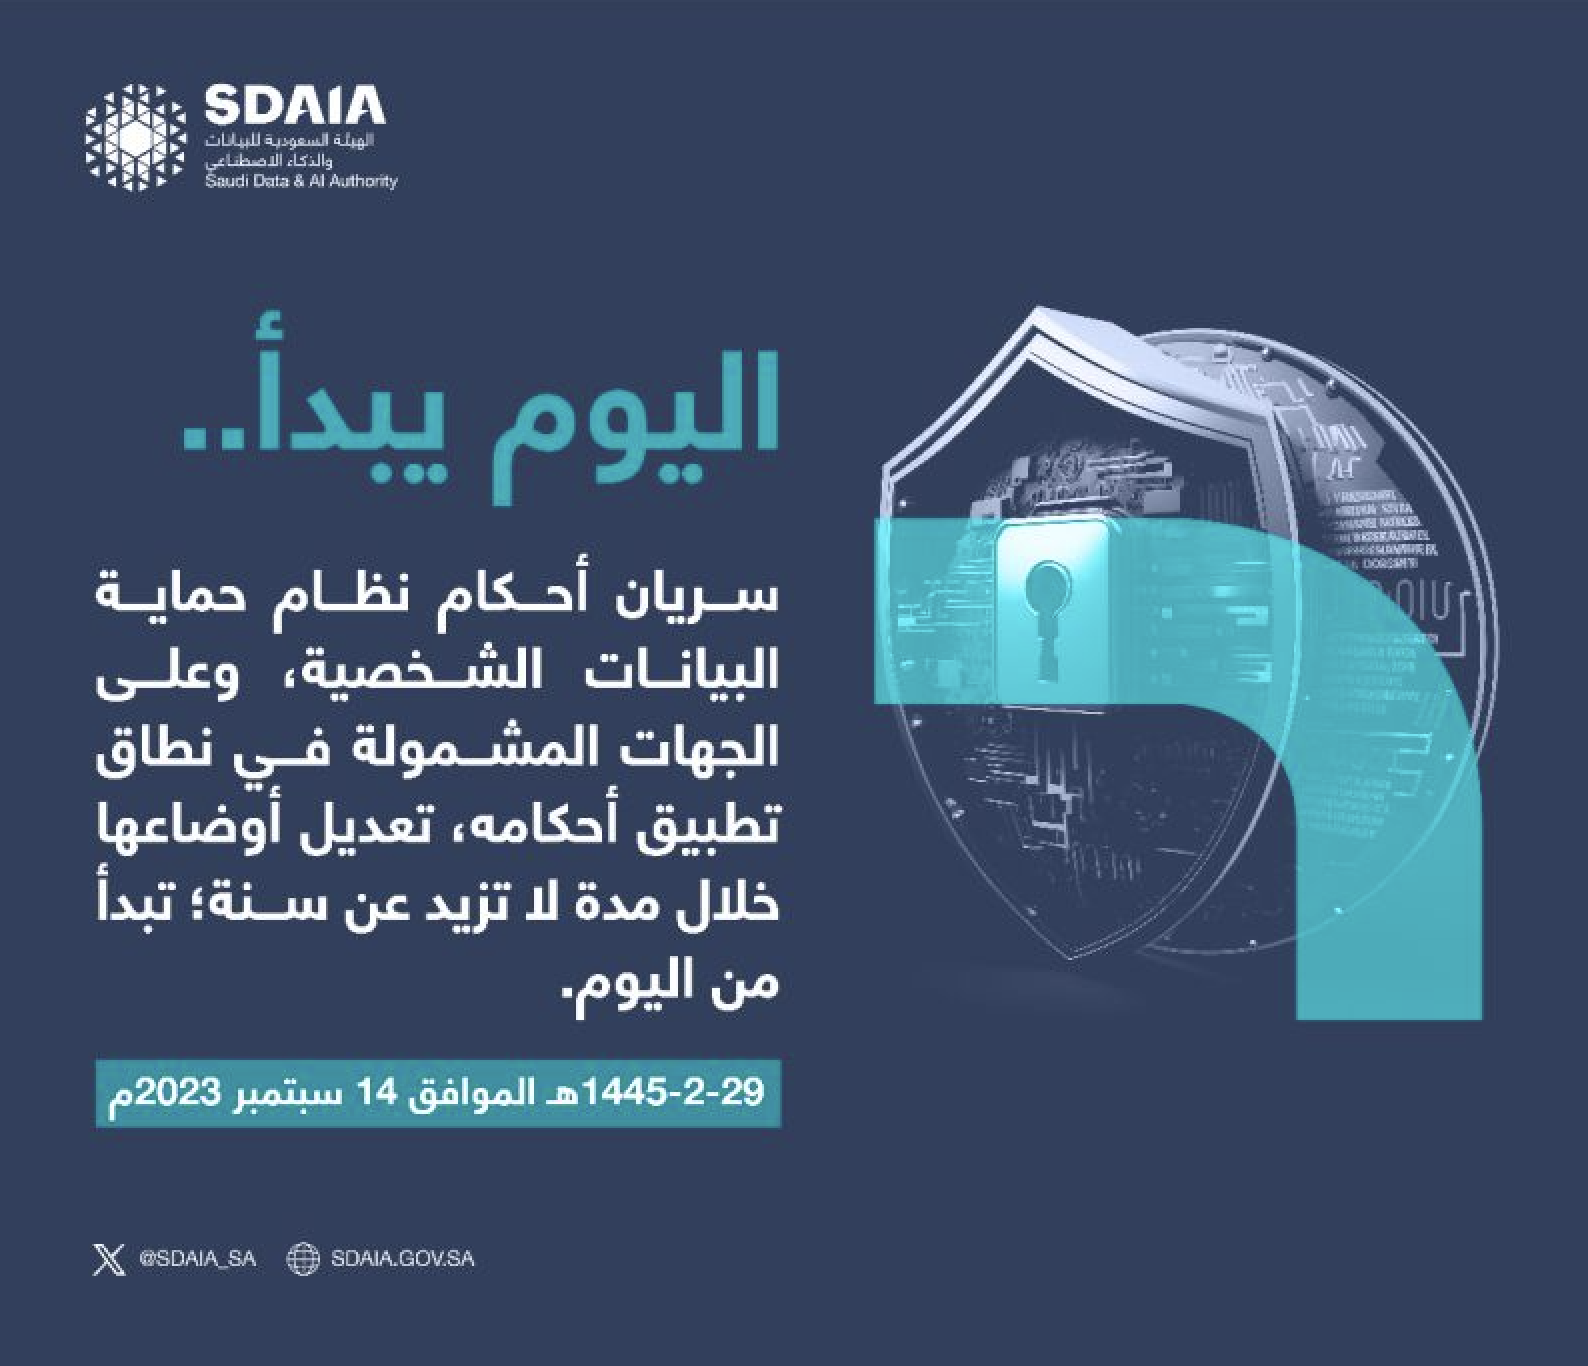 Today marks the official launch of the Personal Data Protection Law of the Kingdom of Saudi Arabia!